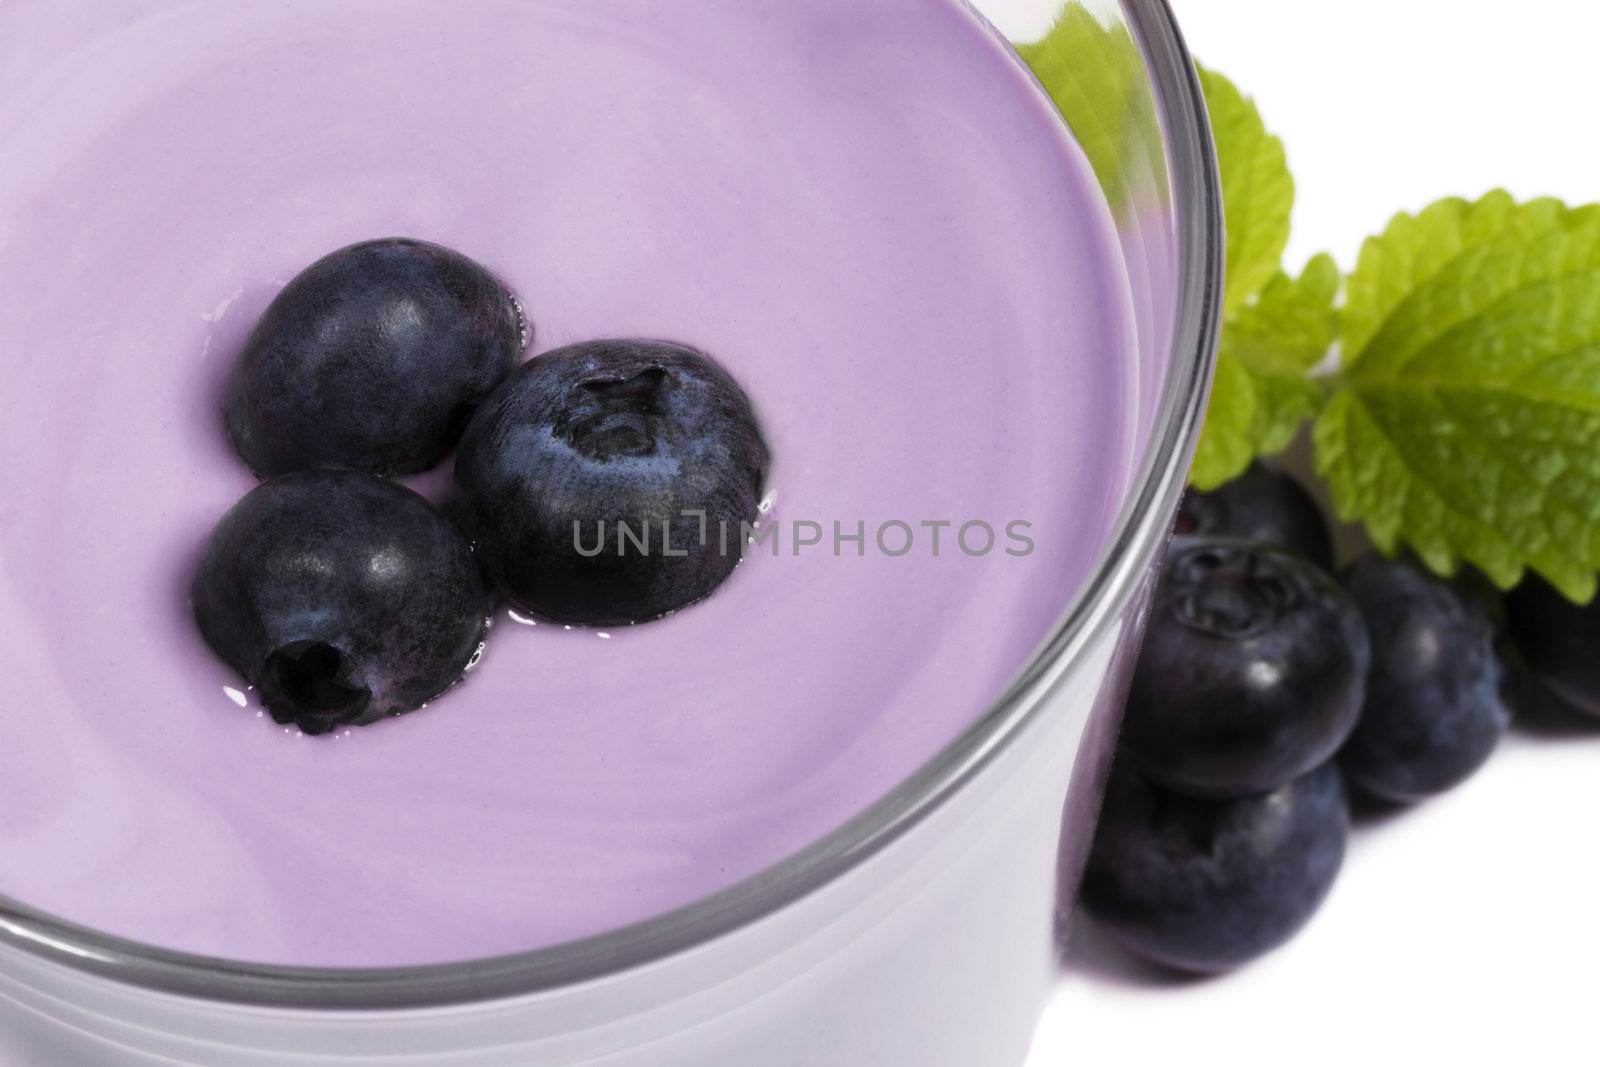 blueberries on top of a blueberry milkshake with blueberries and melissa aside on white background